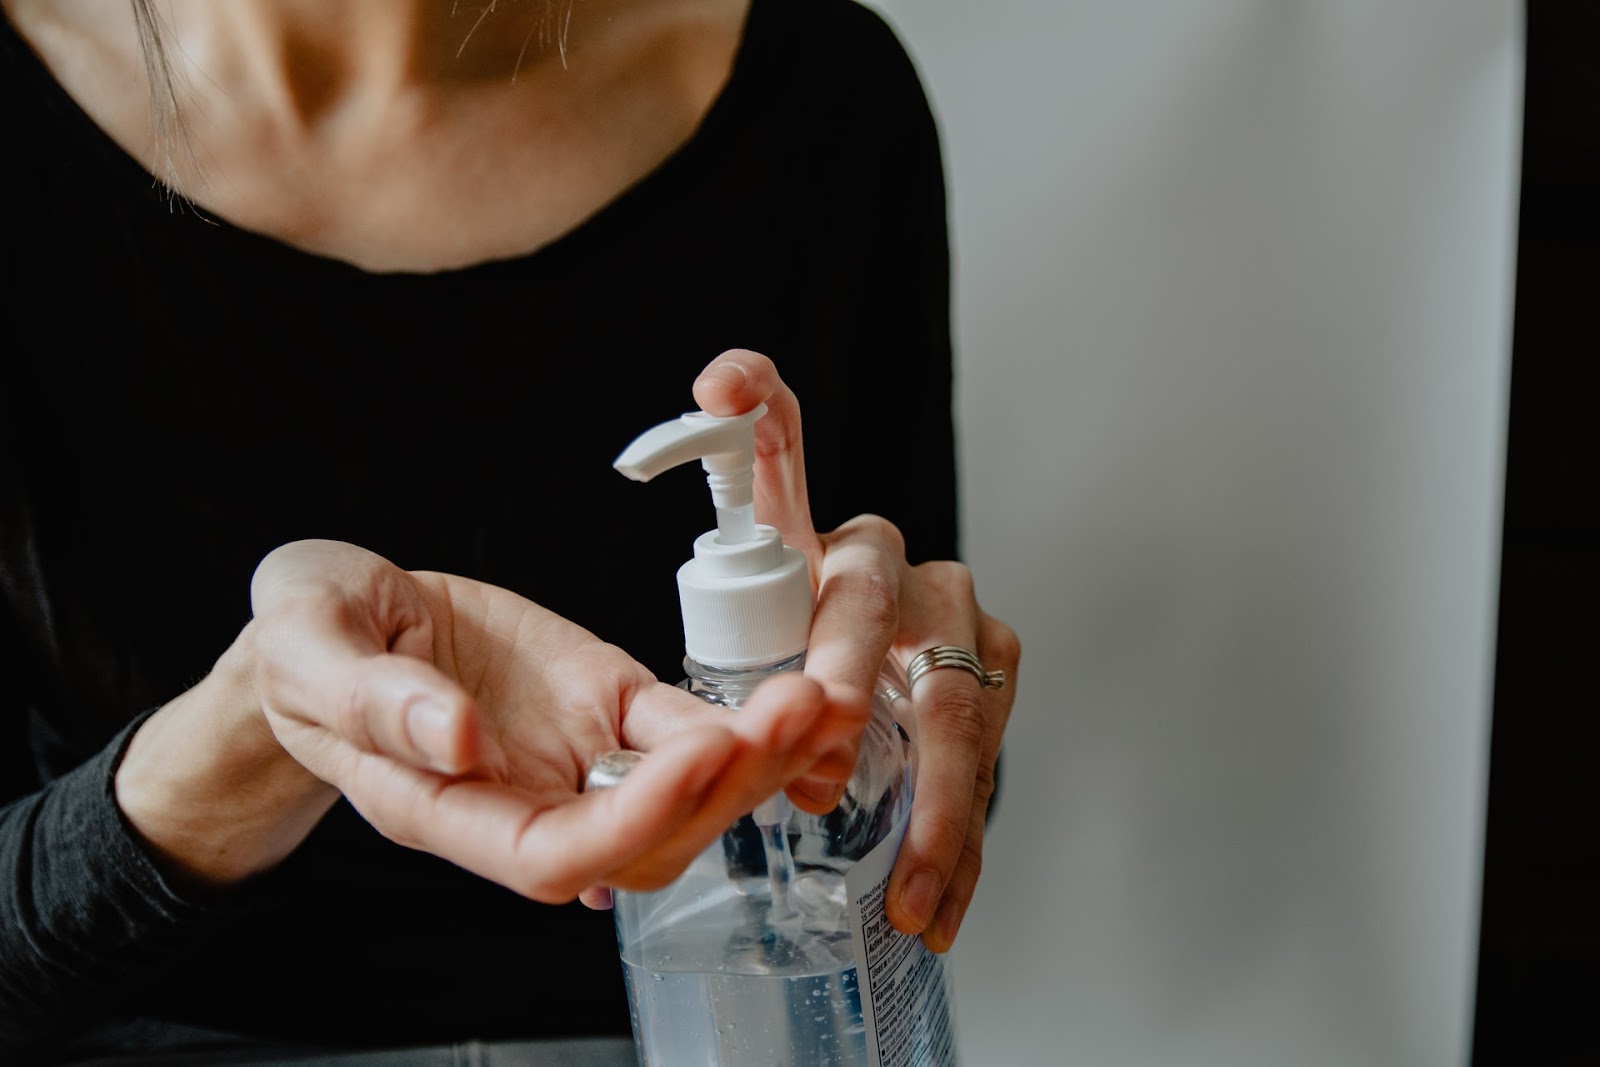 Image of Hand Sanitizer and Hands